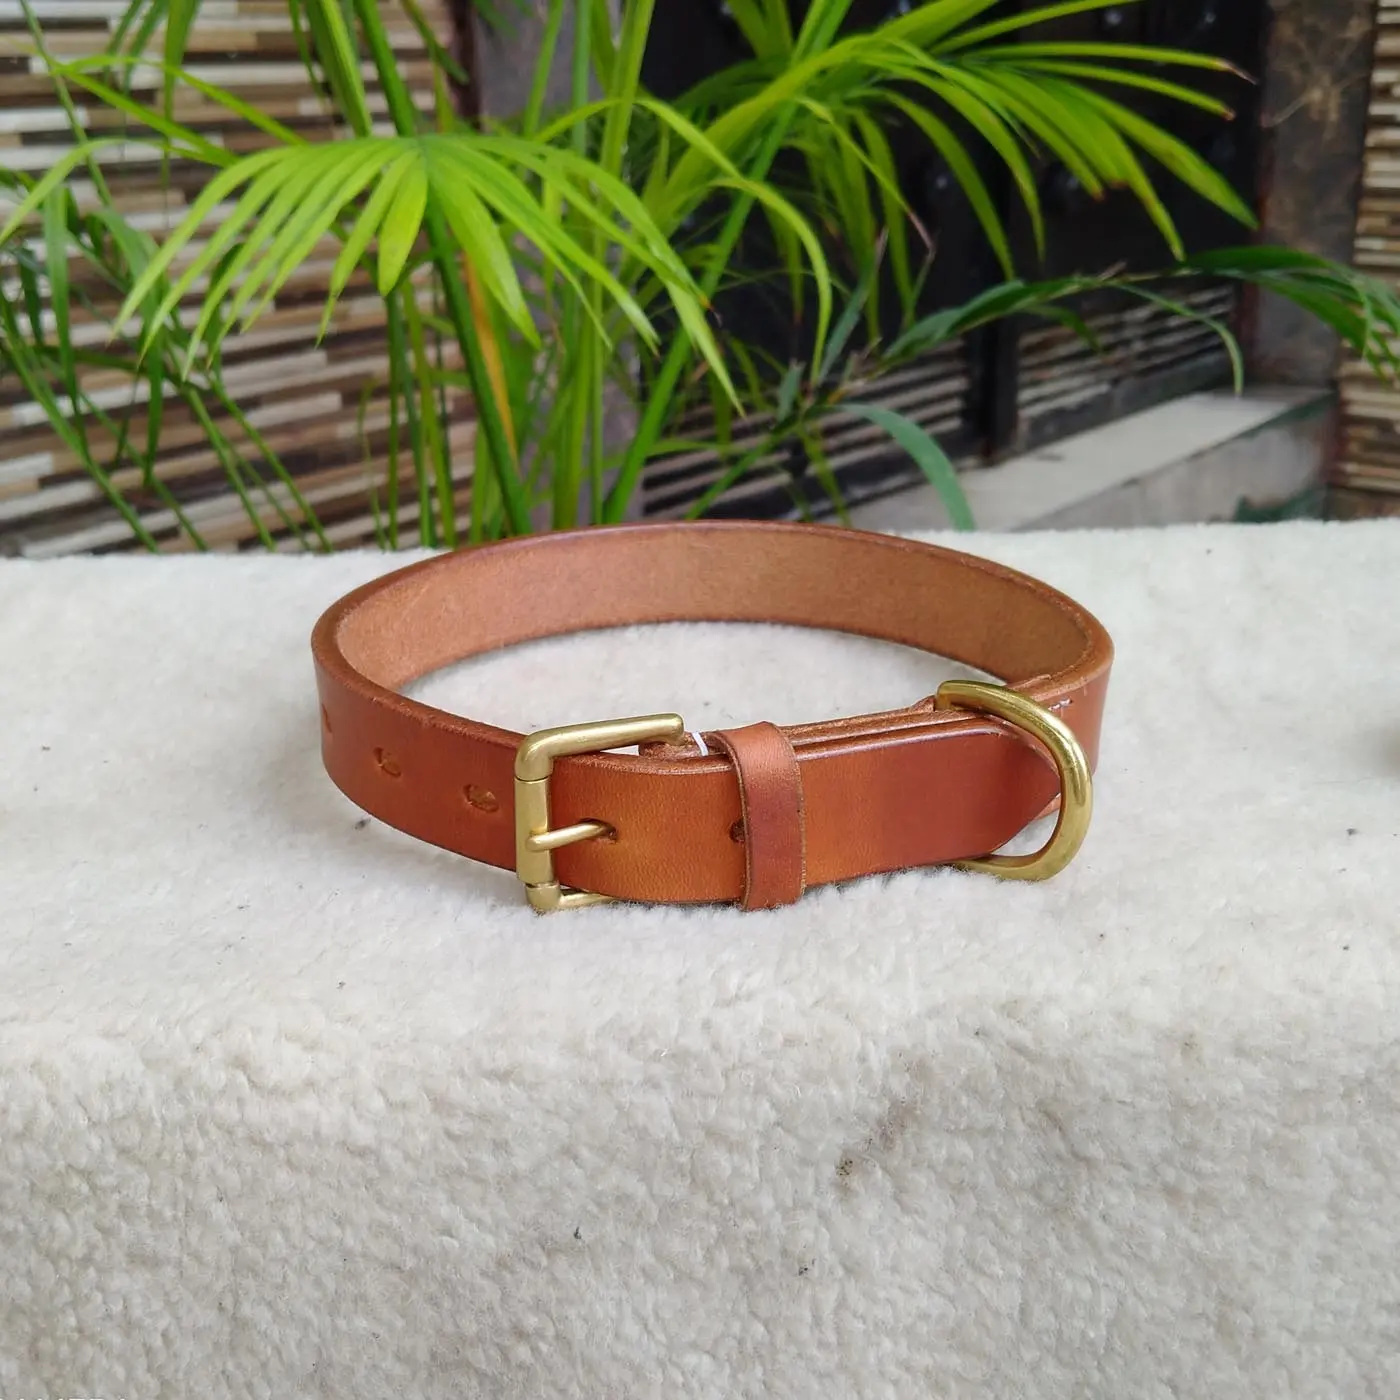 Top Quality - Full Grain American Cow Leather Dog Collar-6ミリメートルThick Leather - Solid Brass Buckle & D-RingとRivet Fasten